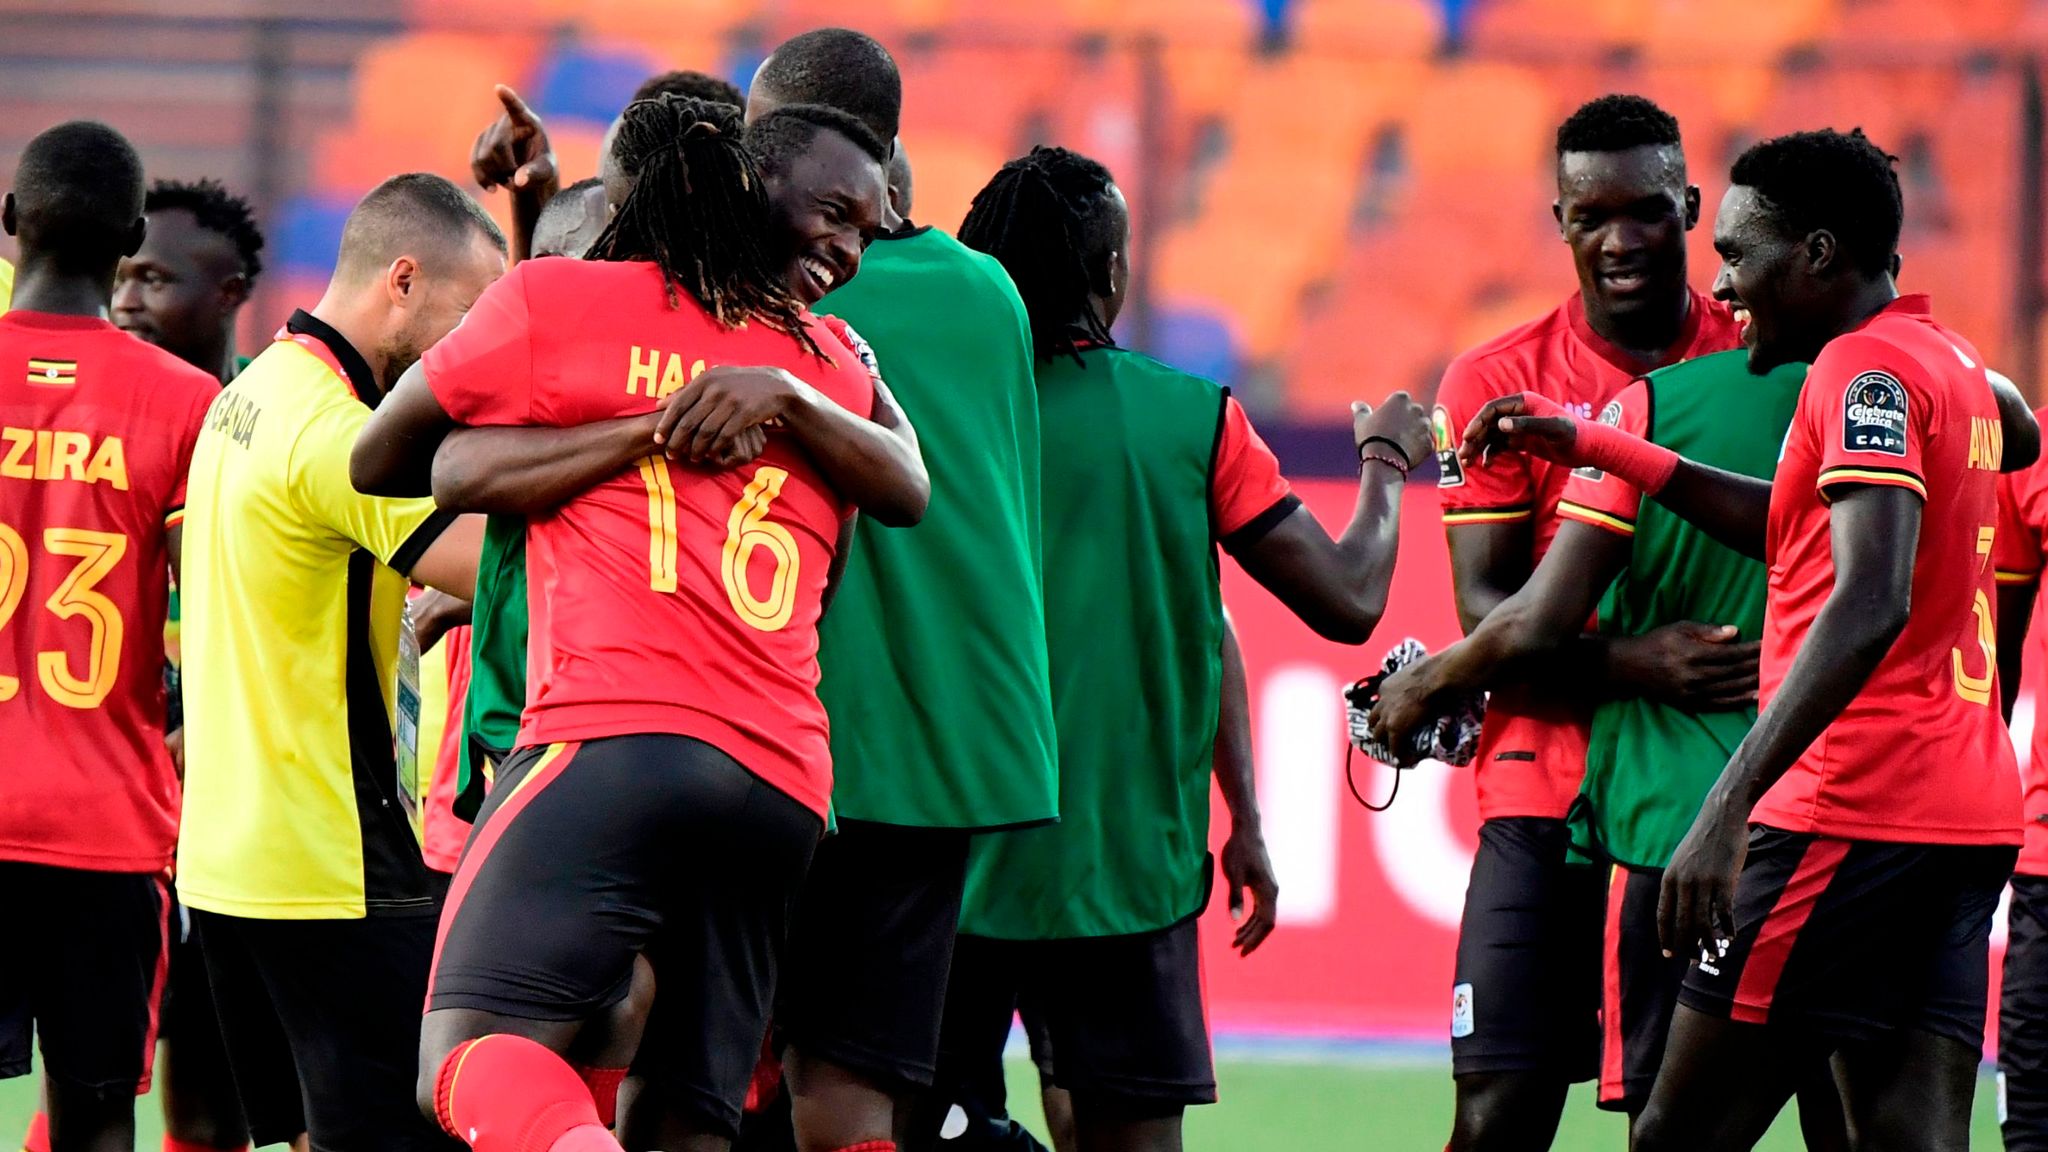 AFCON round-up: Uganda claim historic win, Nigeria secure late victory